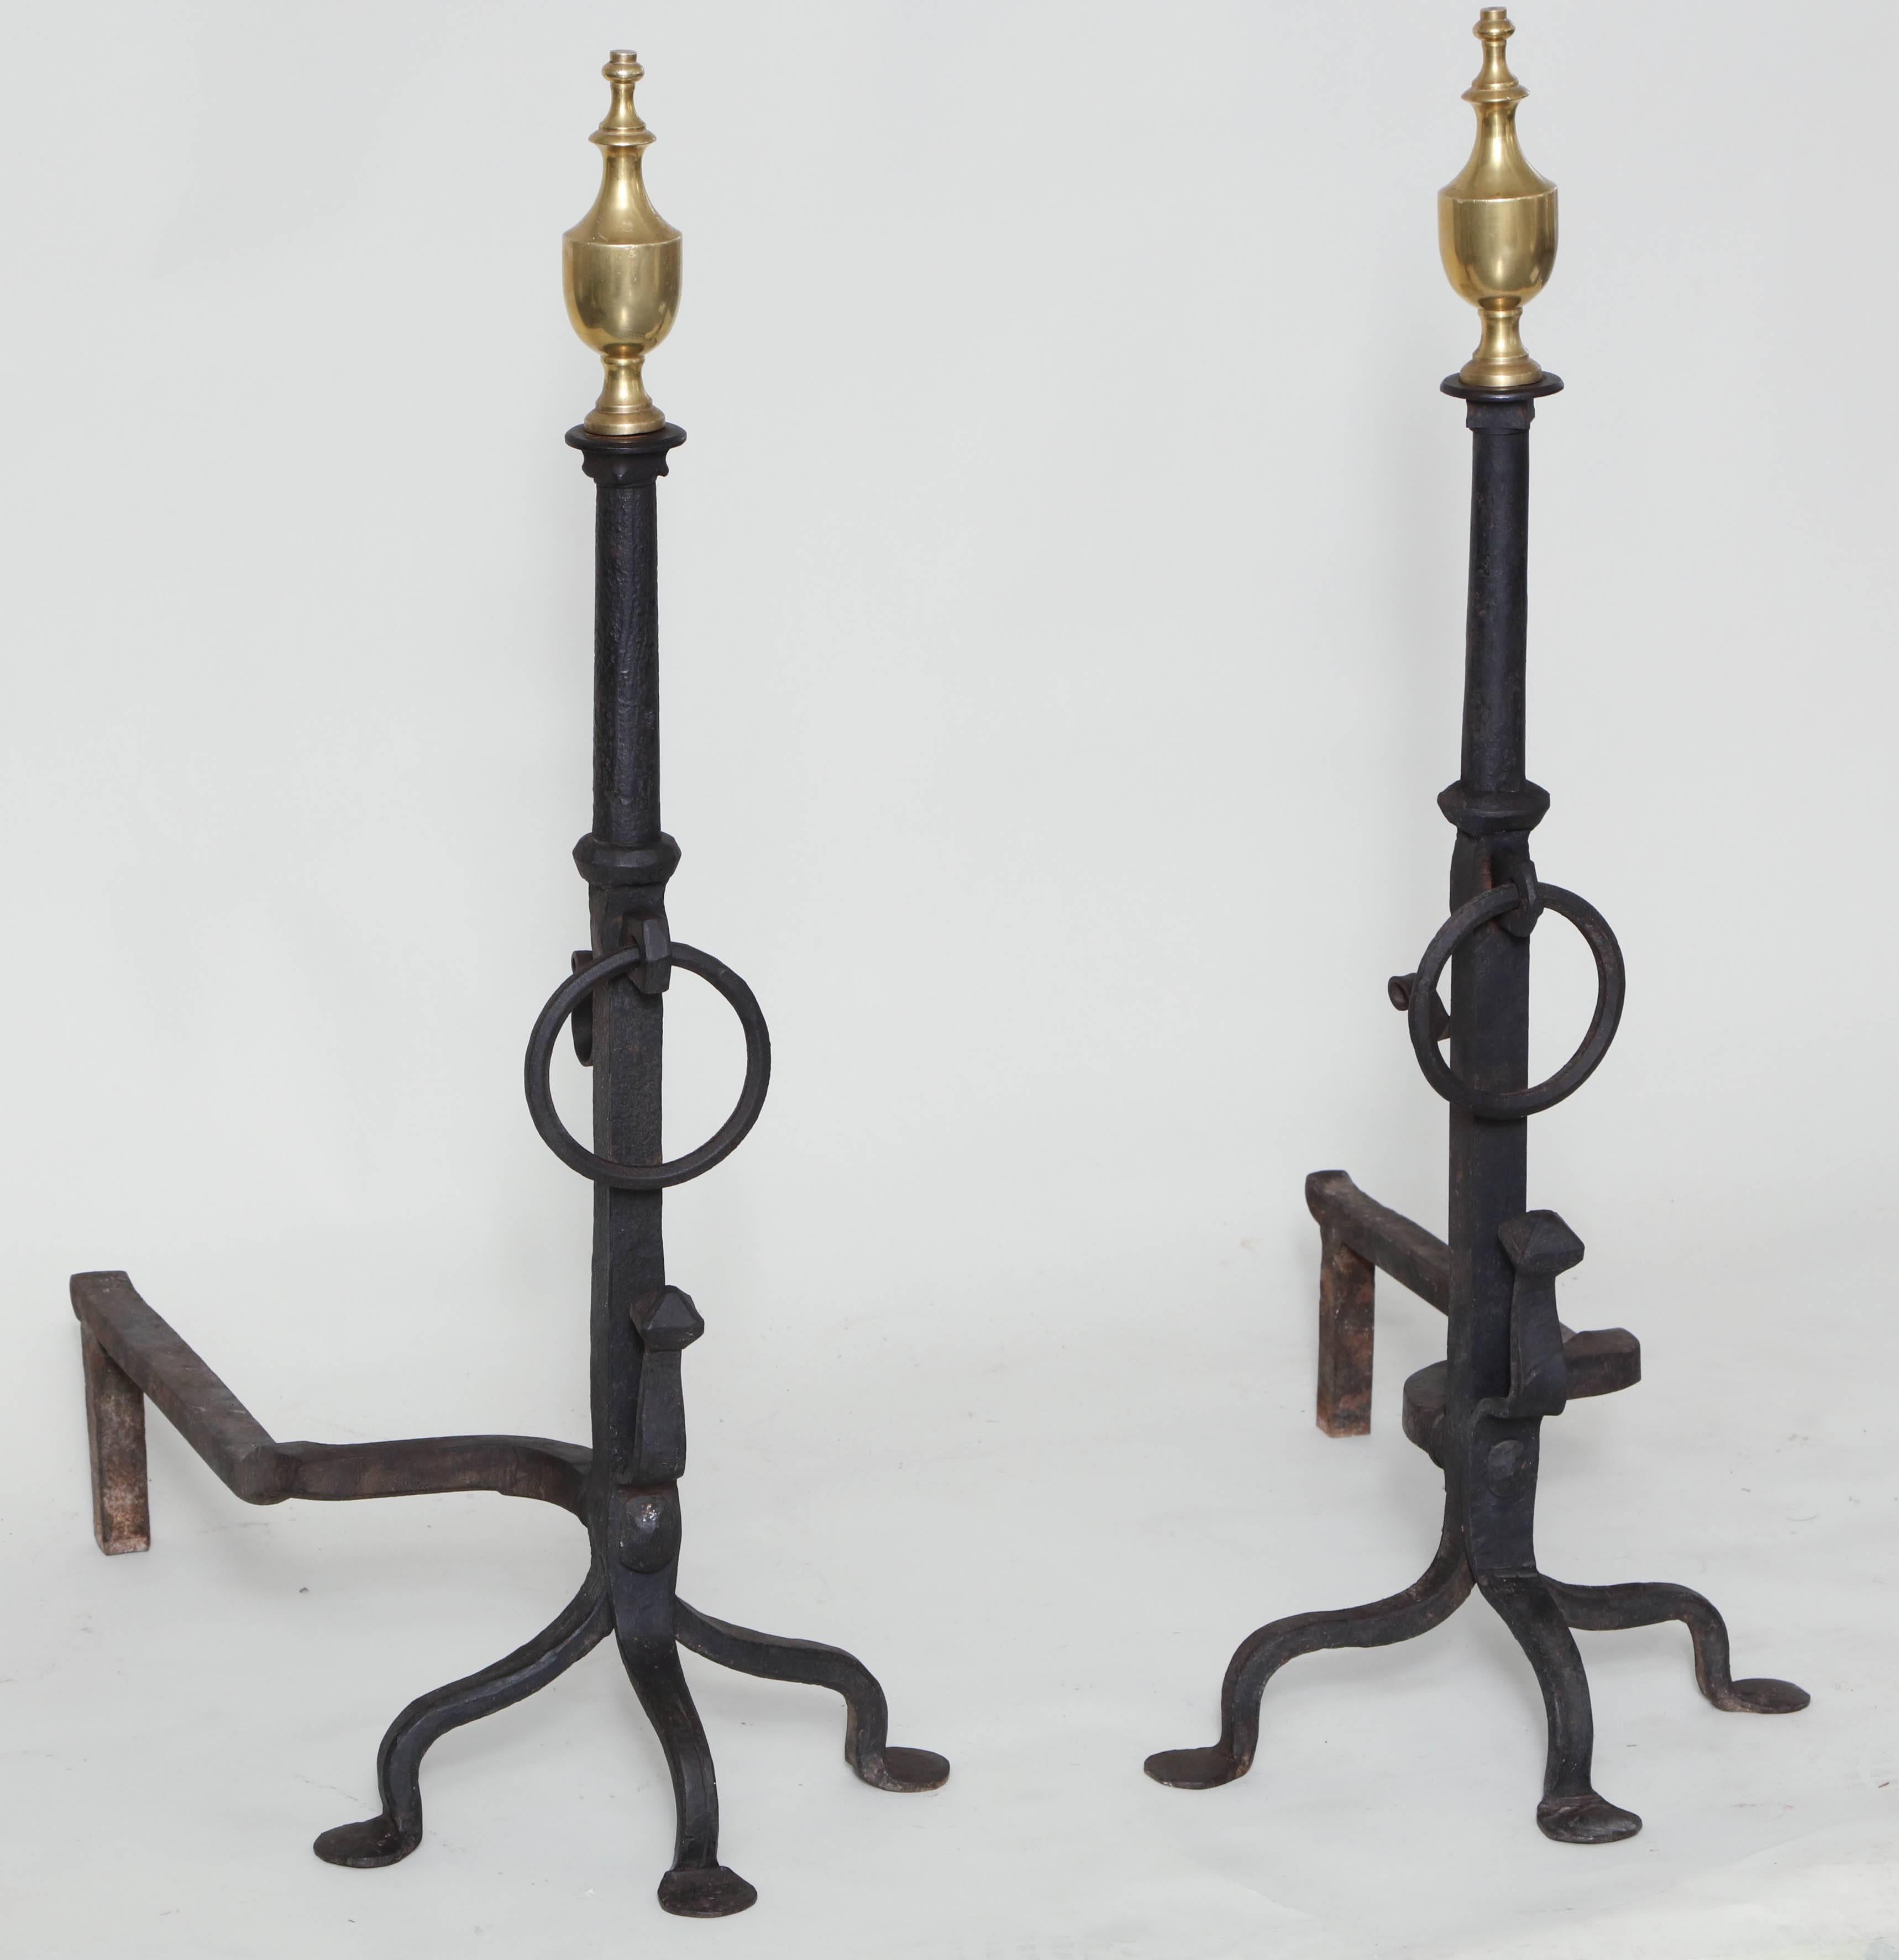 Good pair of brass and wrought iron Federal style andirons of impressive scale, the brass urn finials over column shaped upper shafts, ringed centers, standing on three shaped legs ending in penny feet.